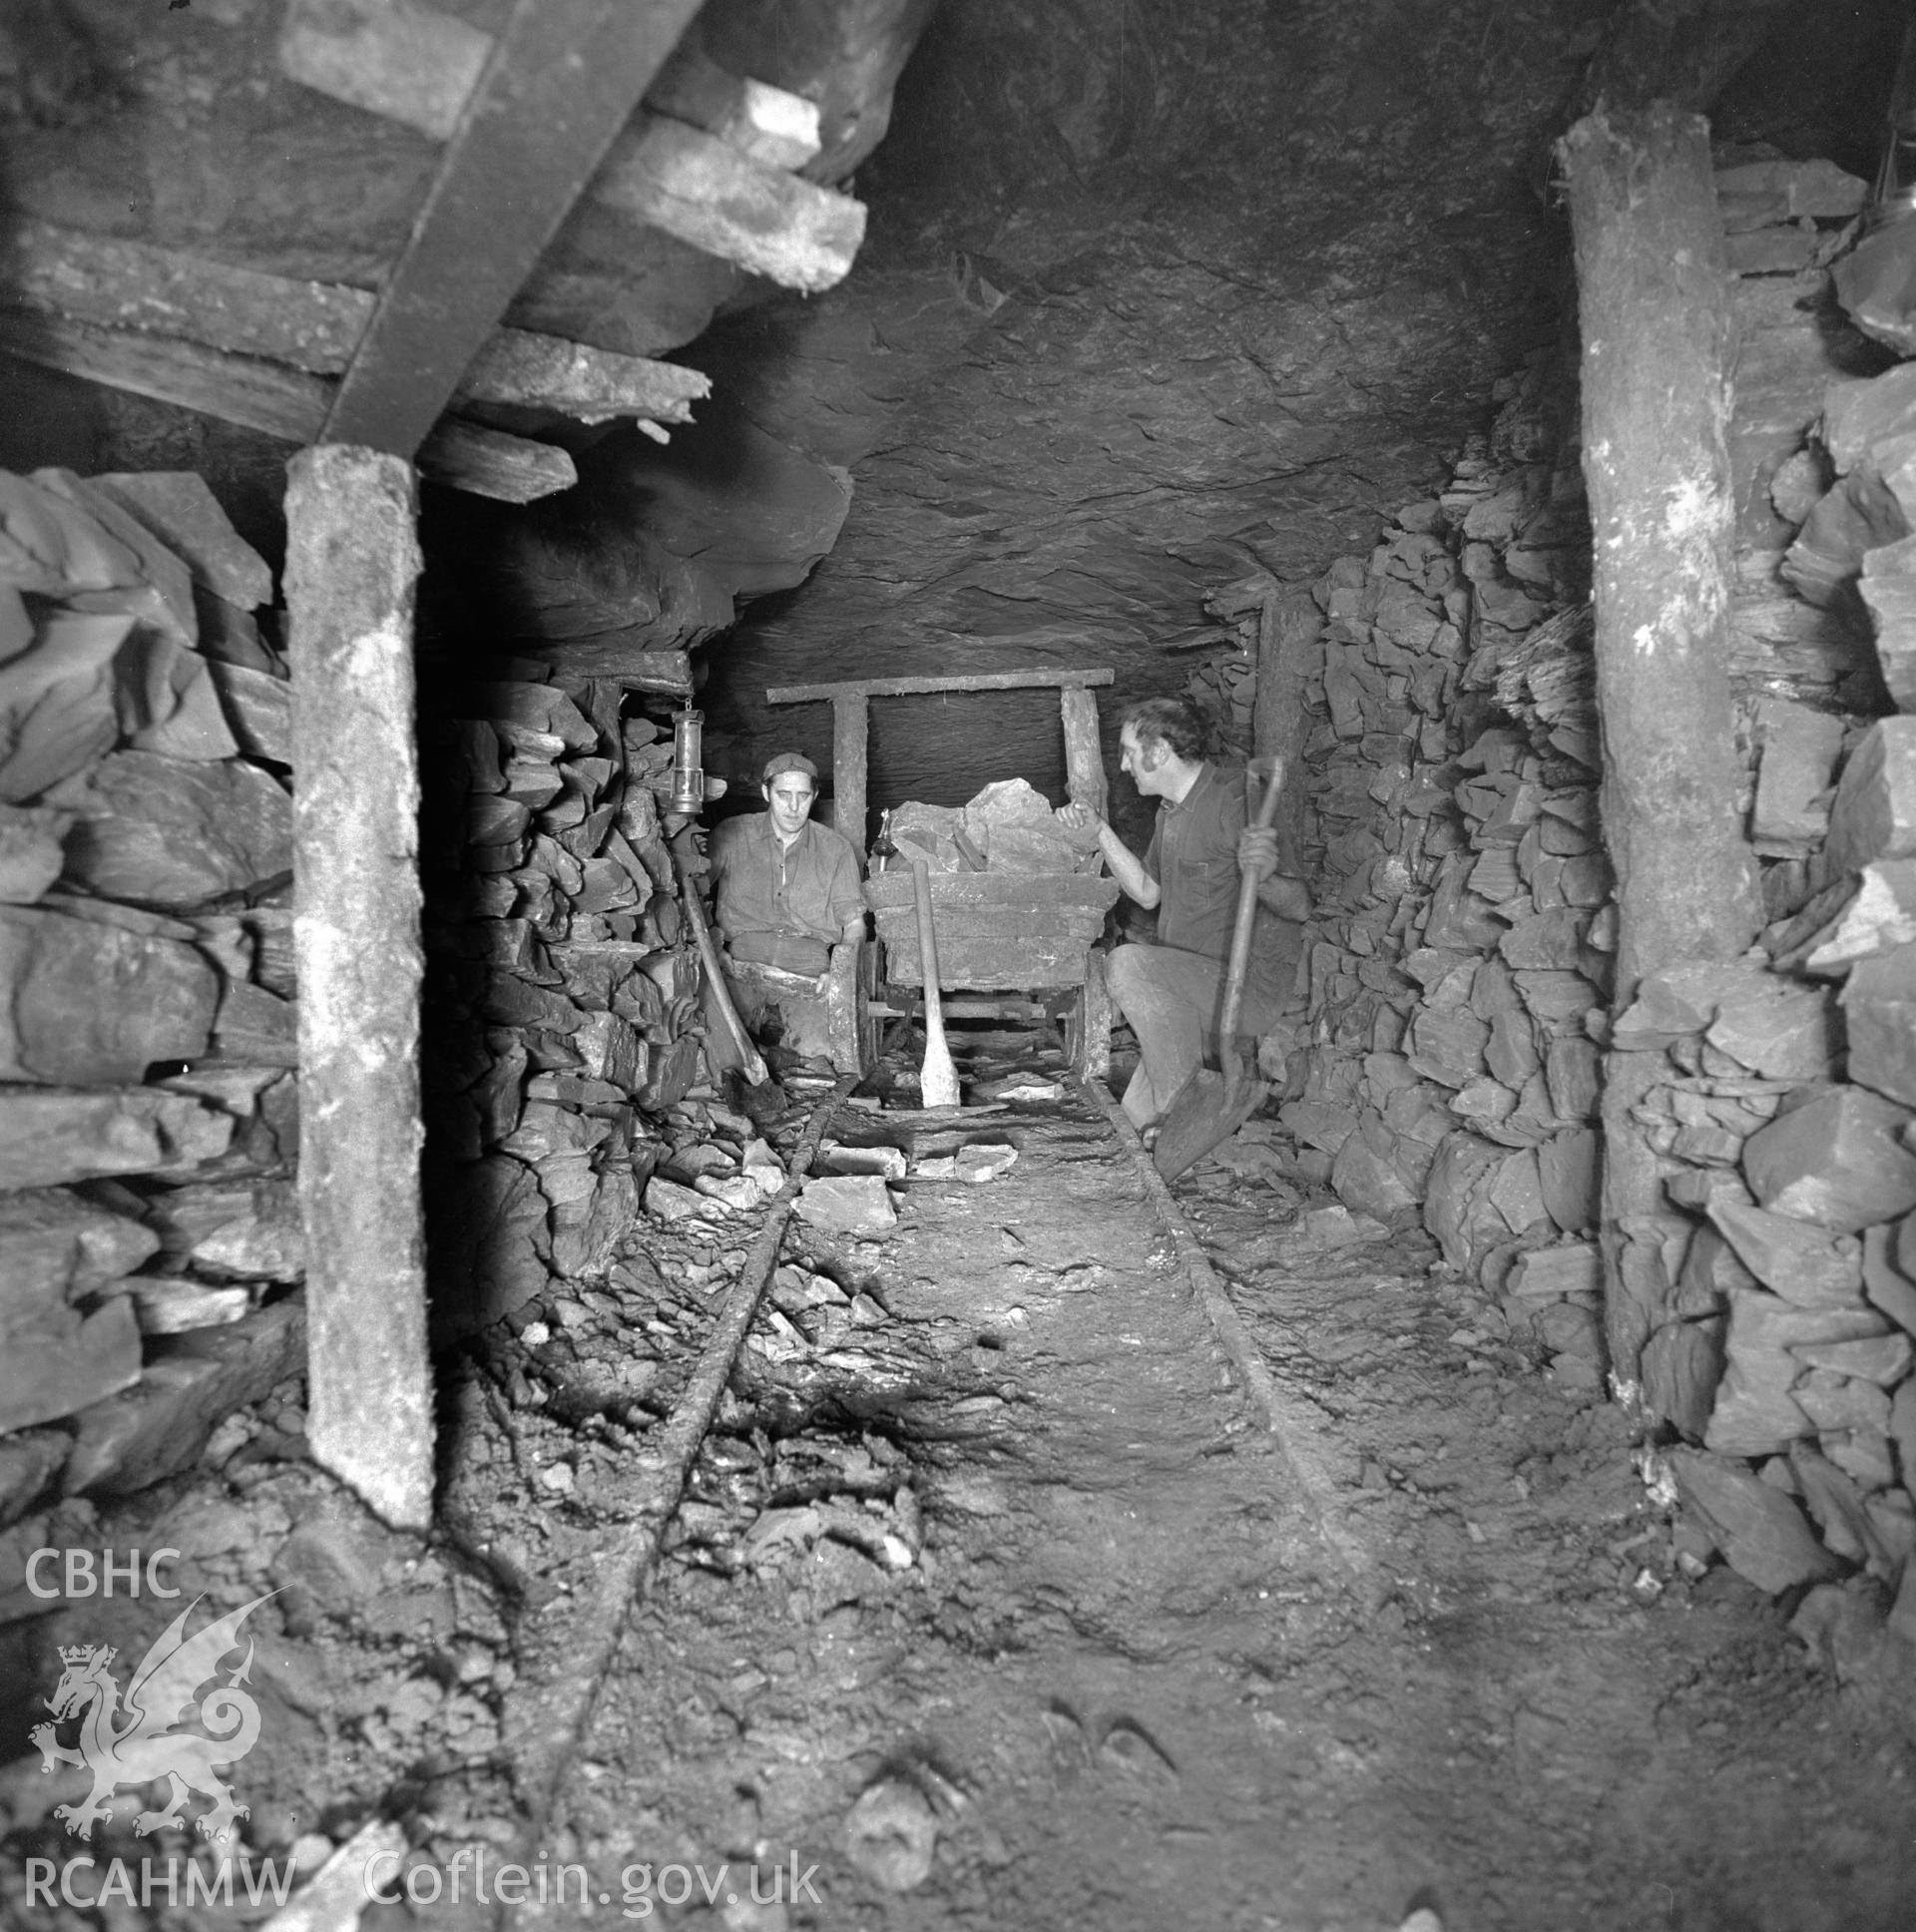 Digital copy of an acetate negative showing Big Pit - workmen in old 19th C. workings in Coity Pits, from the John Cornwell Collection.